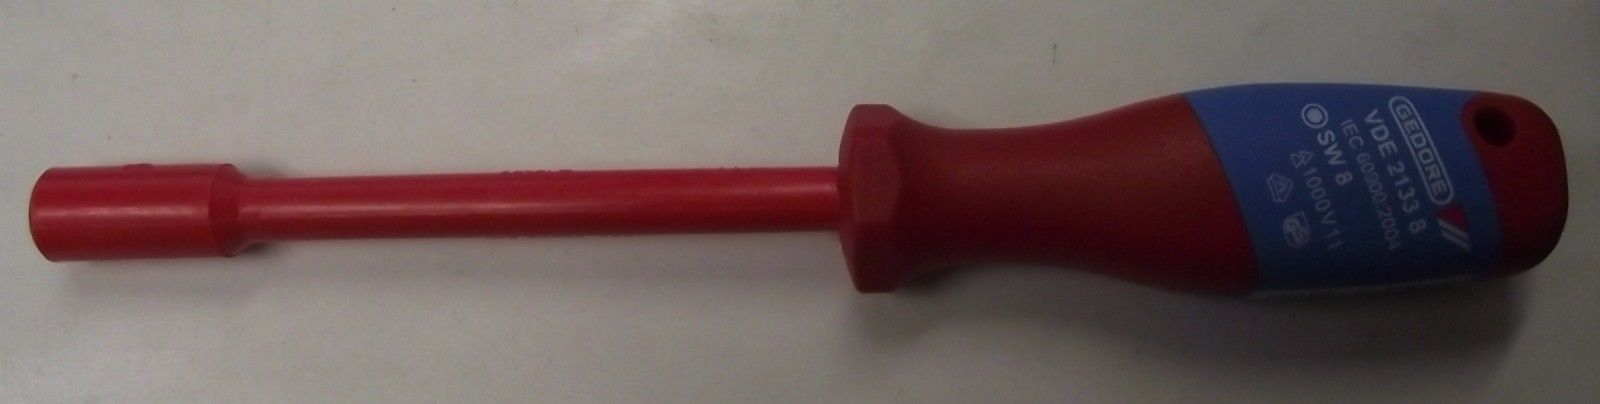 Gedore VDE 2133 8 Vde Insulated Socket Wrench With Handle 8mm